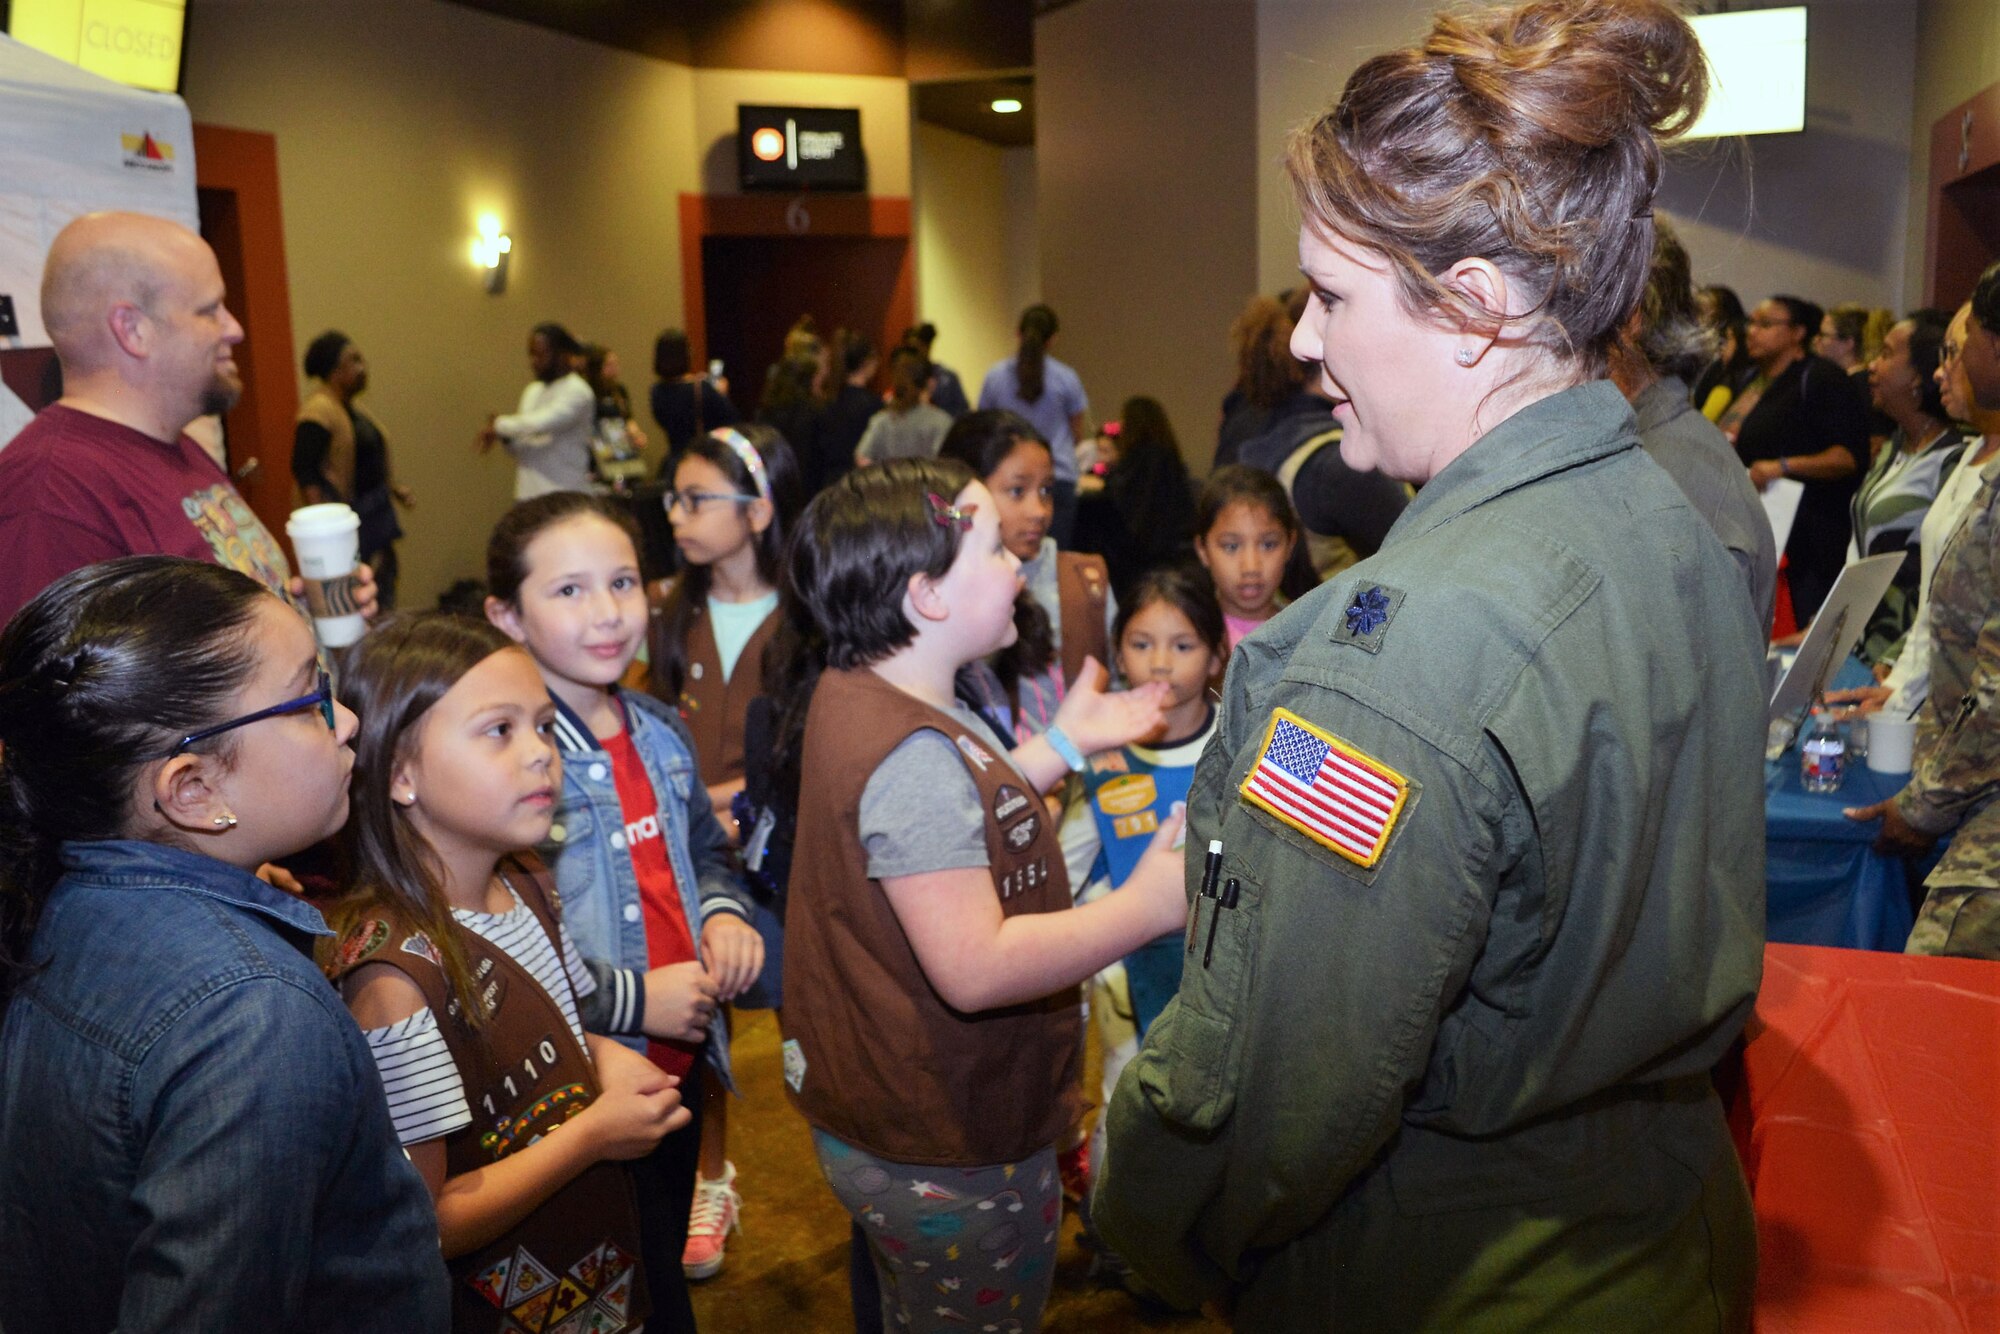 Lt. Col. Kari Hill, a C-5M Super Galaxy aircraft pilot and squadron commander with the 433rd Operations Support Squadron, Joint Base San Antonio-Lackland, Texas talks, one-on-one, with a group of girls attending the “Marvelous Women Don’t Need Capes” event.